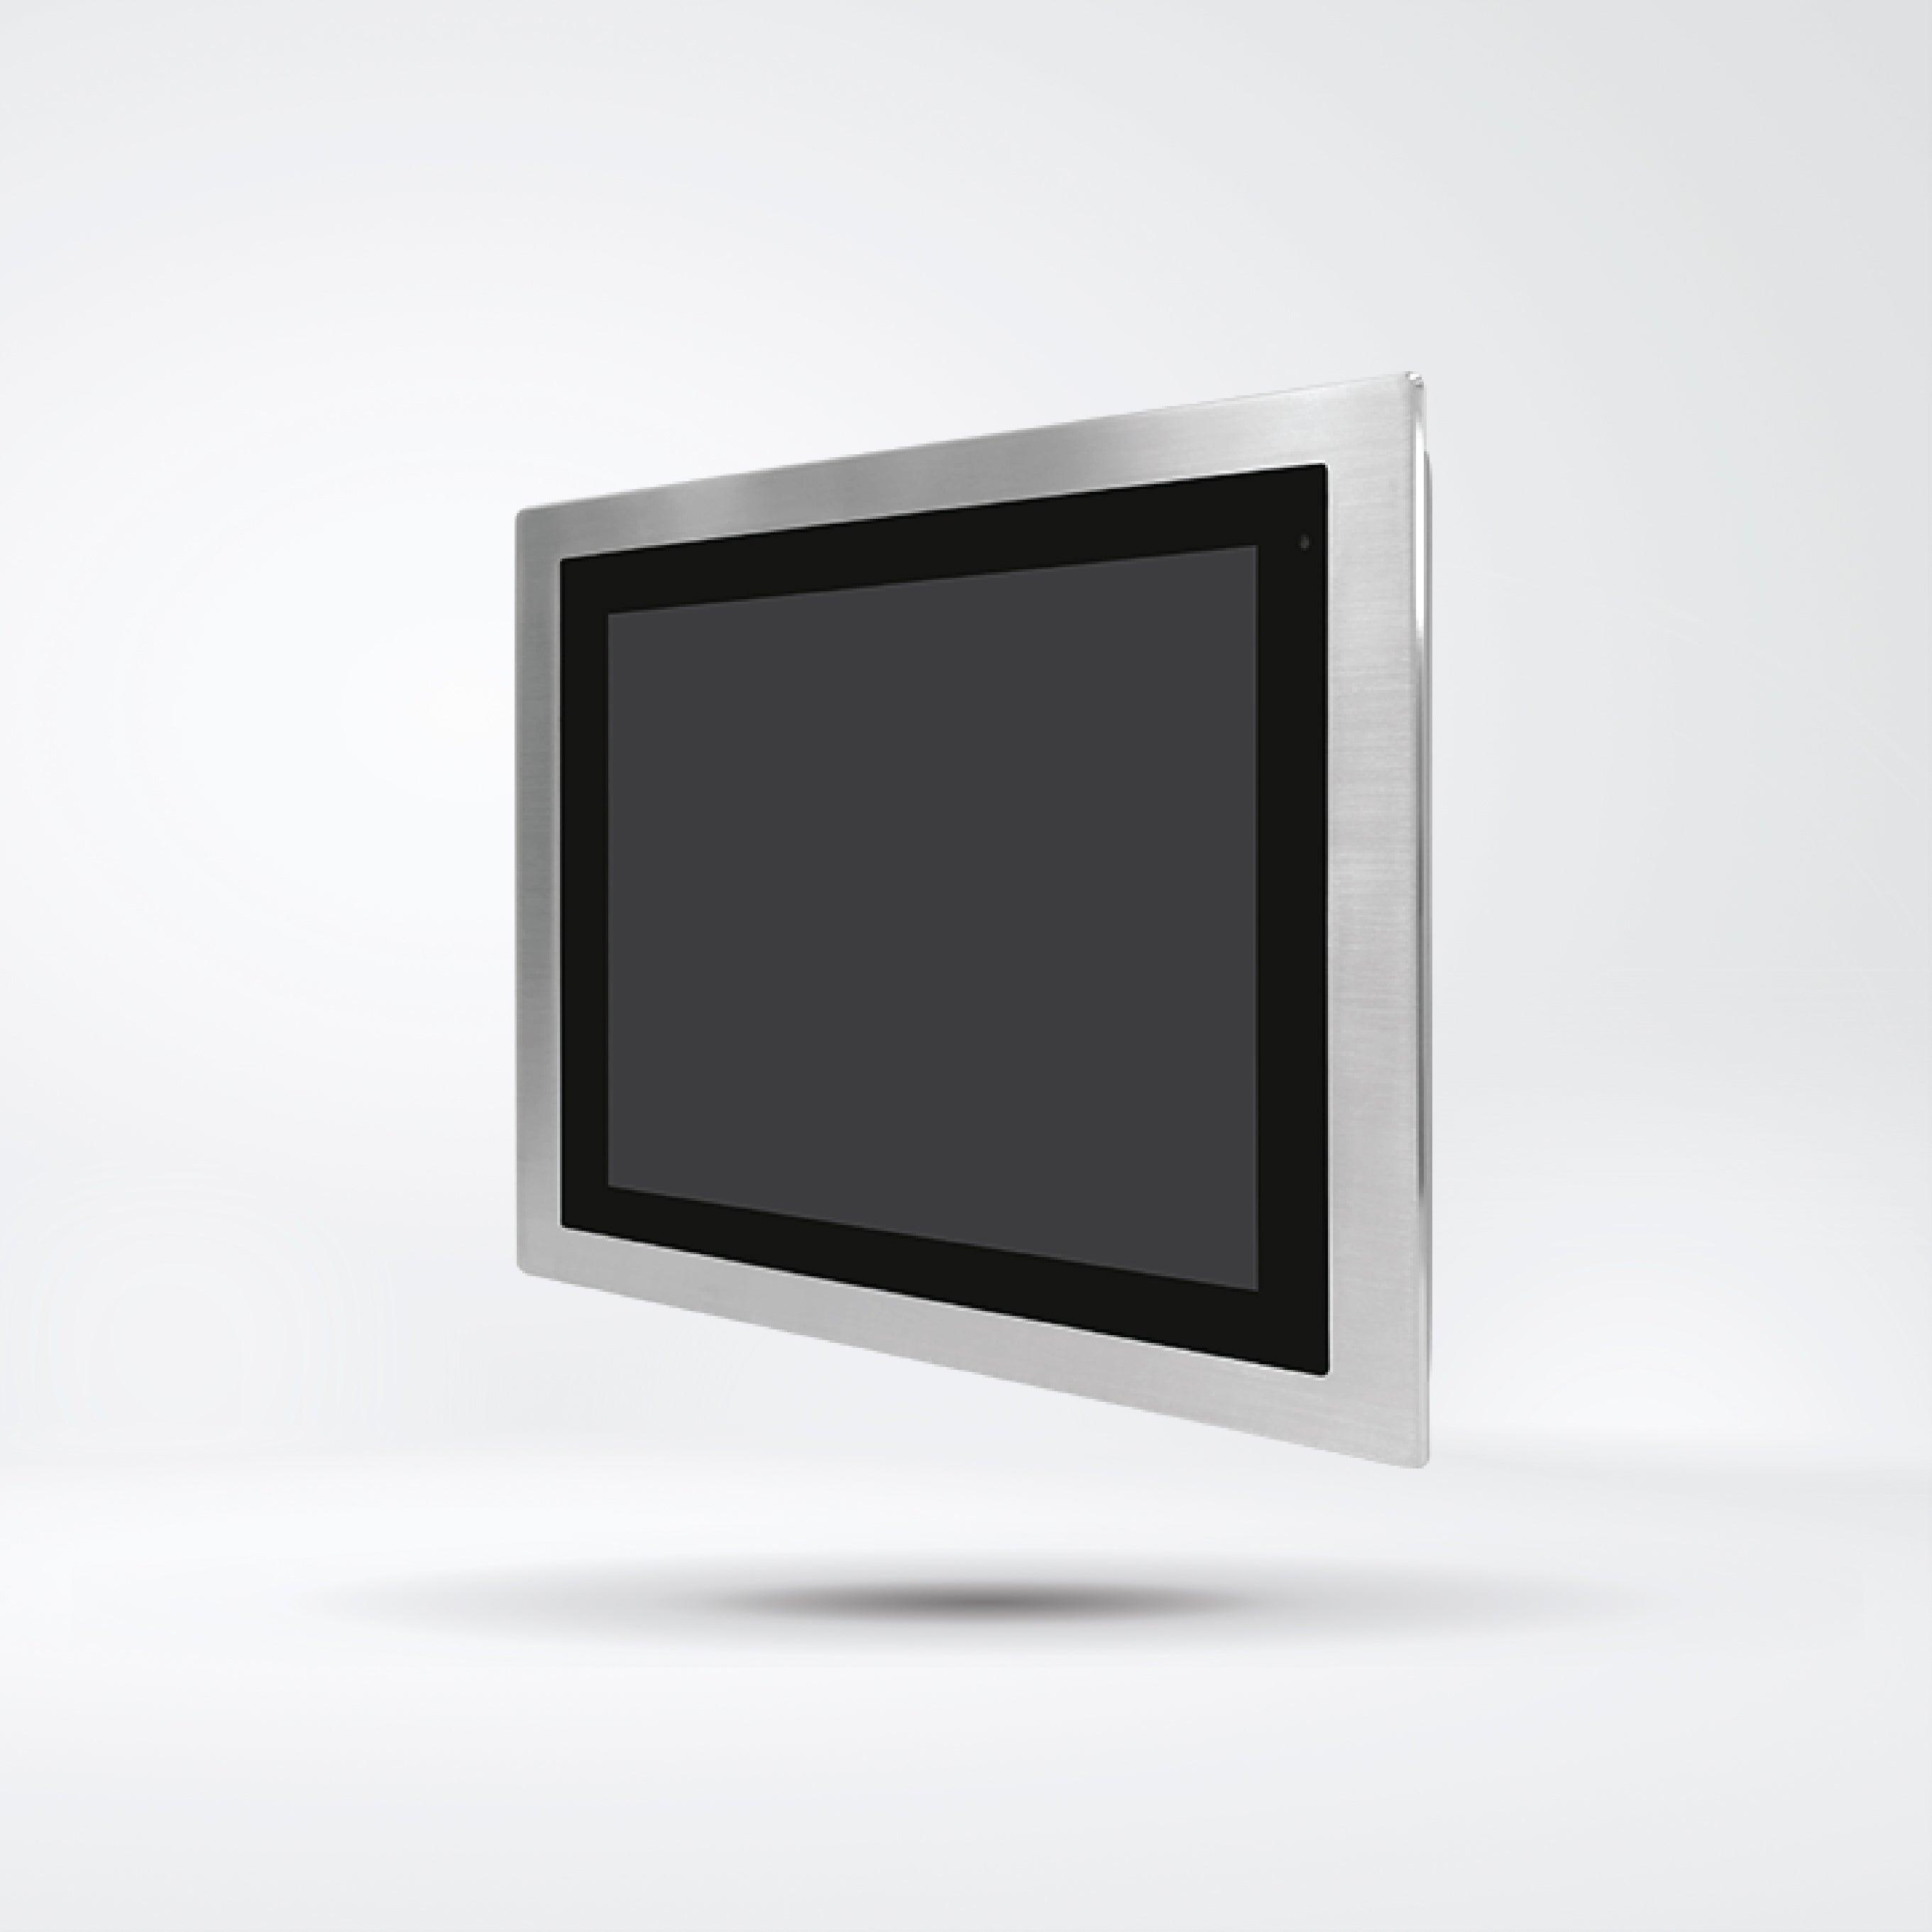 FABS-115RH 15” Flat Front Panel IP66 Stainless Chassis Display - Riverplus